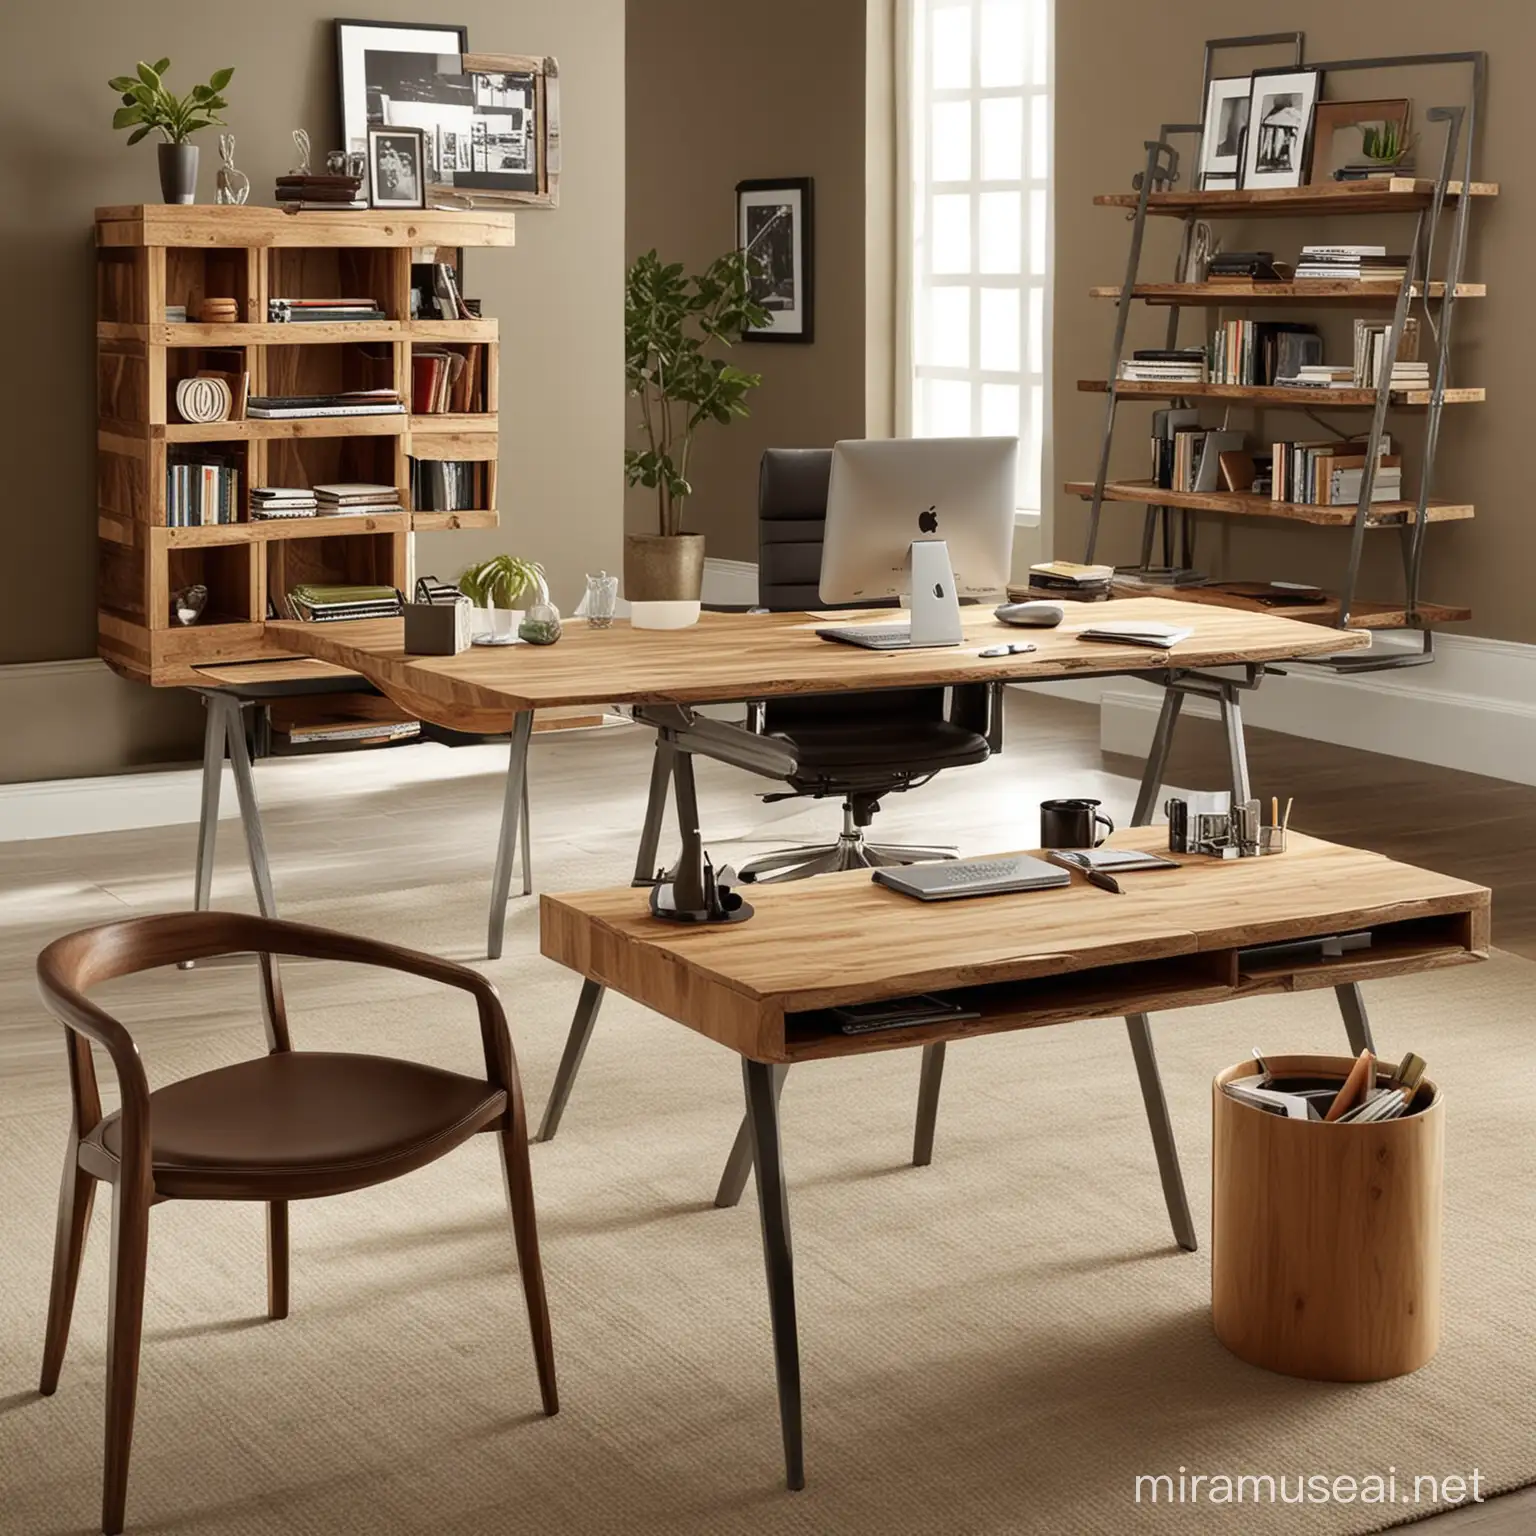 Sustainable Hip Home Offices Stylish Workspaces with Recycled Materials